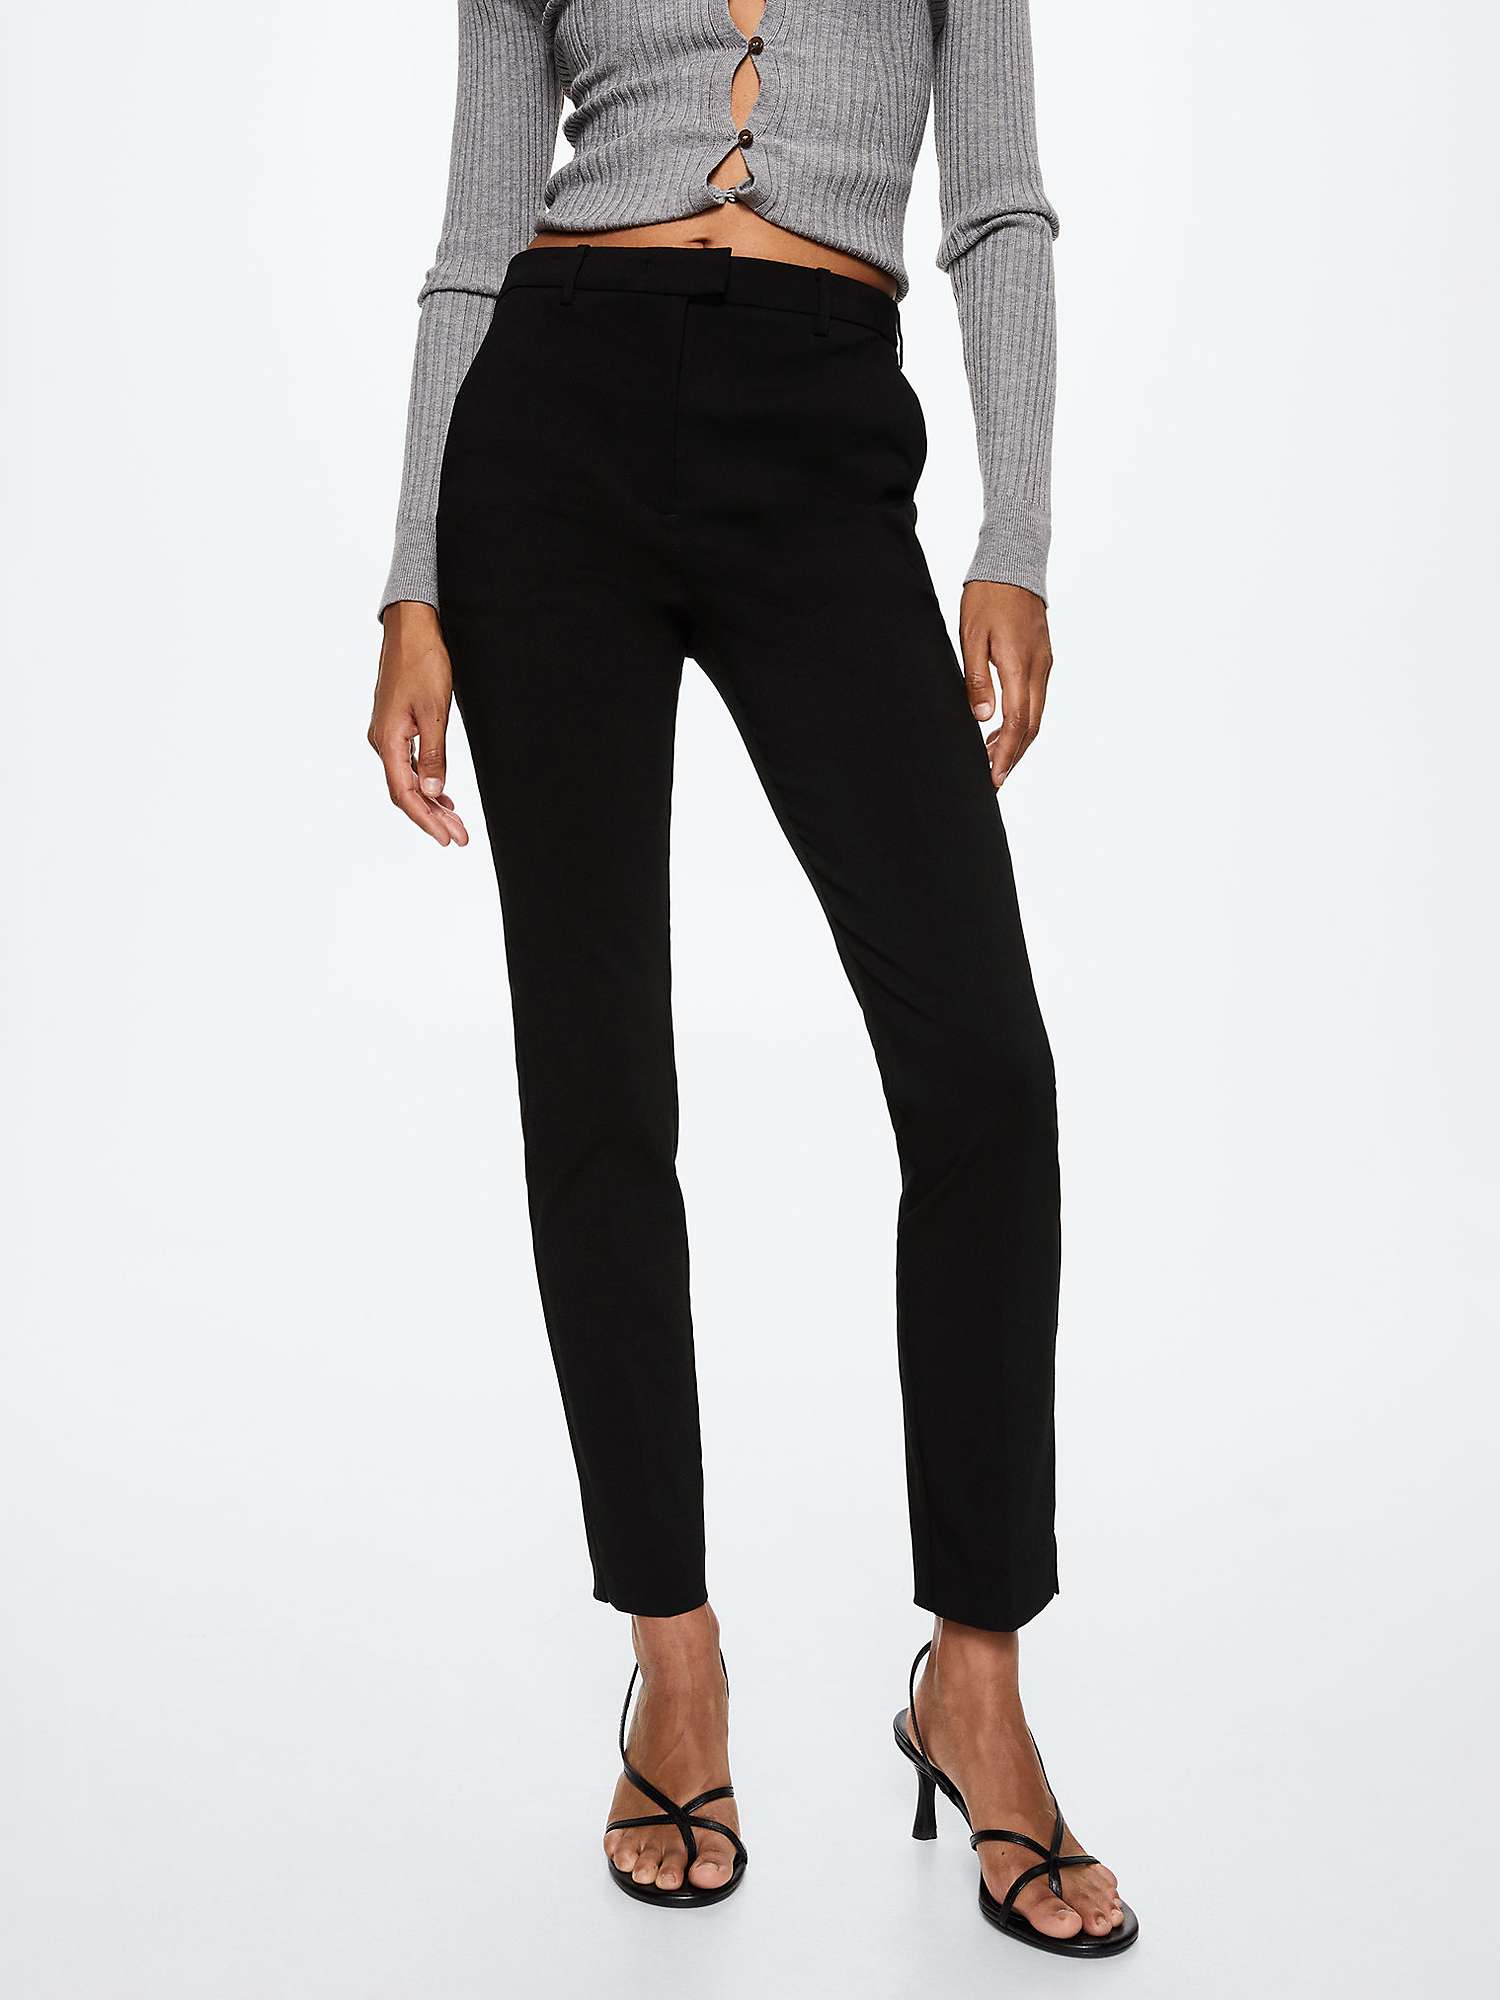 Buy Mango Cola Skinny Fit Trousers Online at johnlewis.com